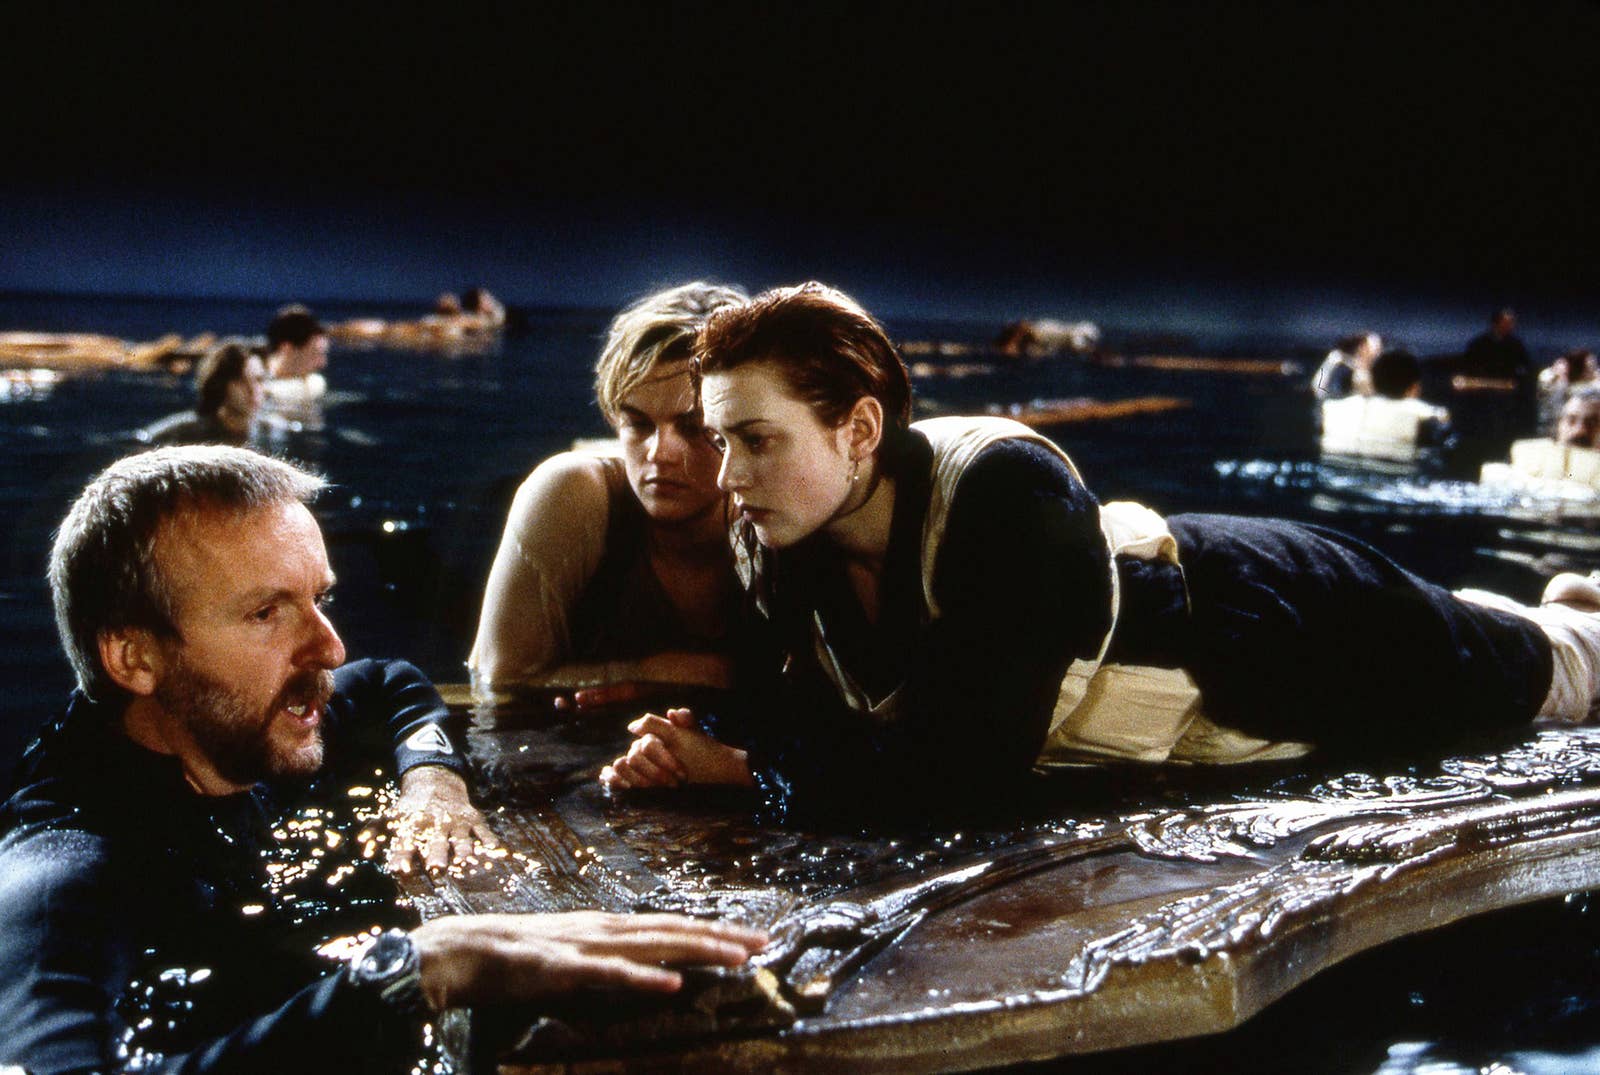 Cameron on set in the water directing Leonardo DiCaprio and Kate Winslet on a floatation device